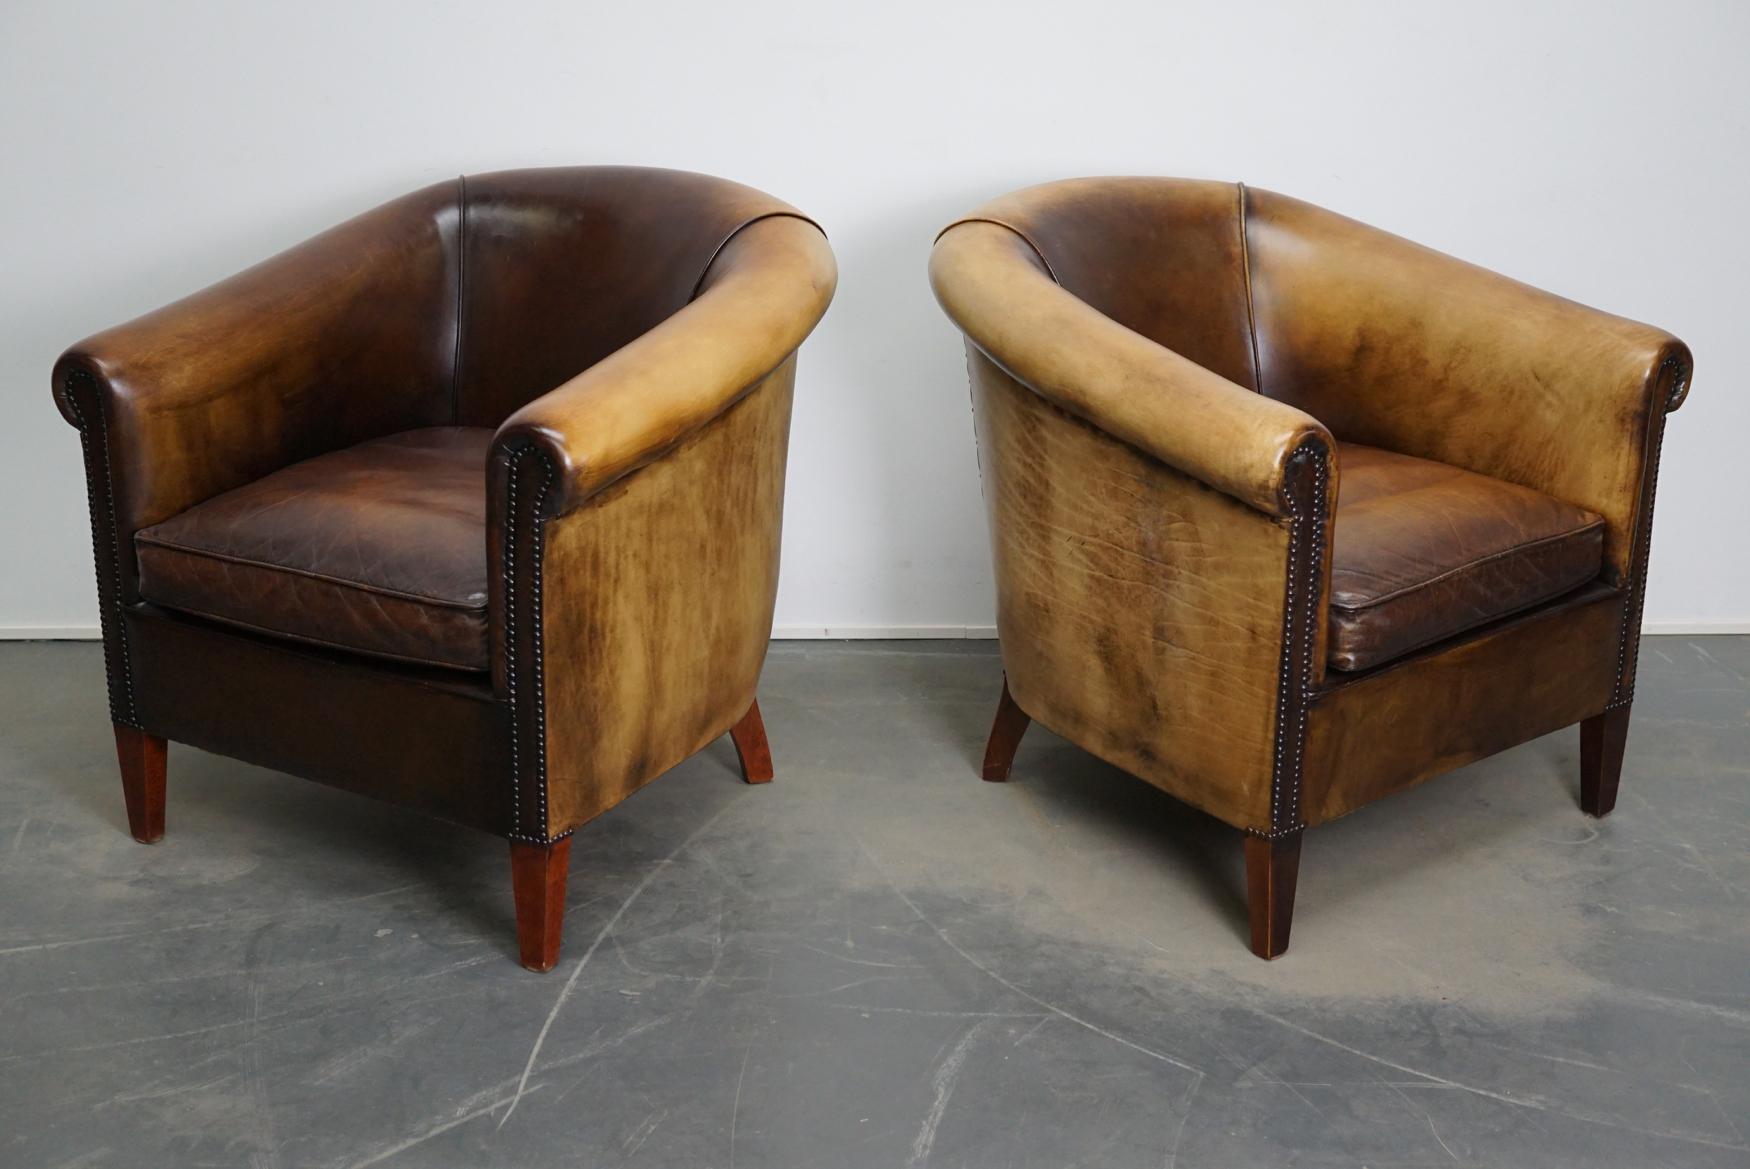 This pair of brown-colored leather club chairs come from the Netherlands. They are upholstered with cognac-colored leather and feature metal rivets and wooden legs.